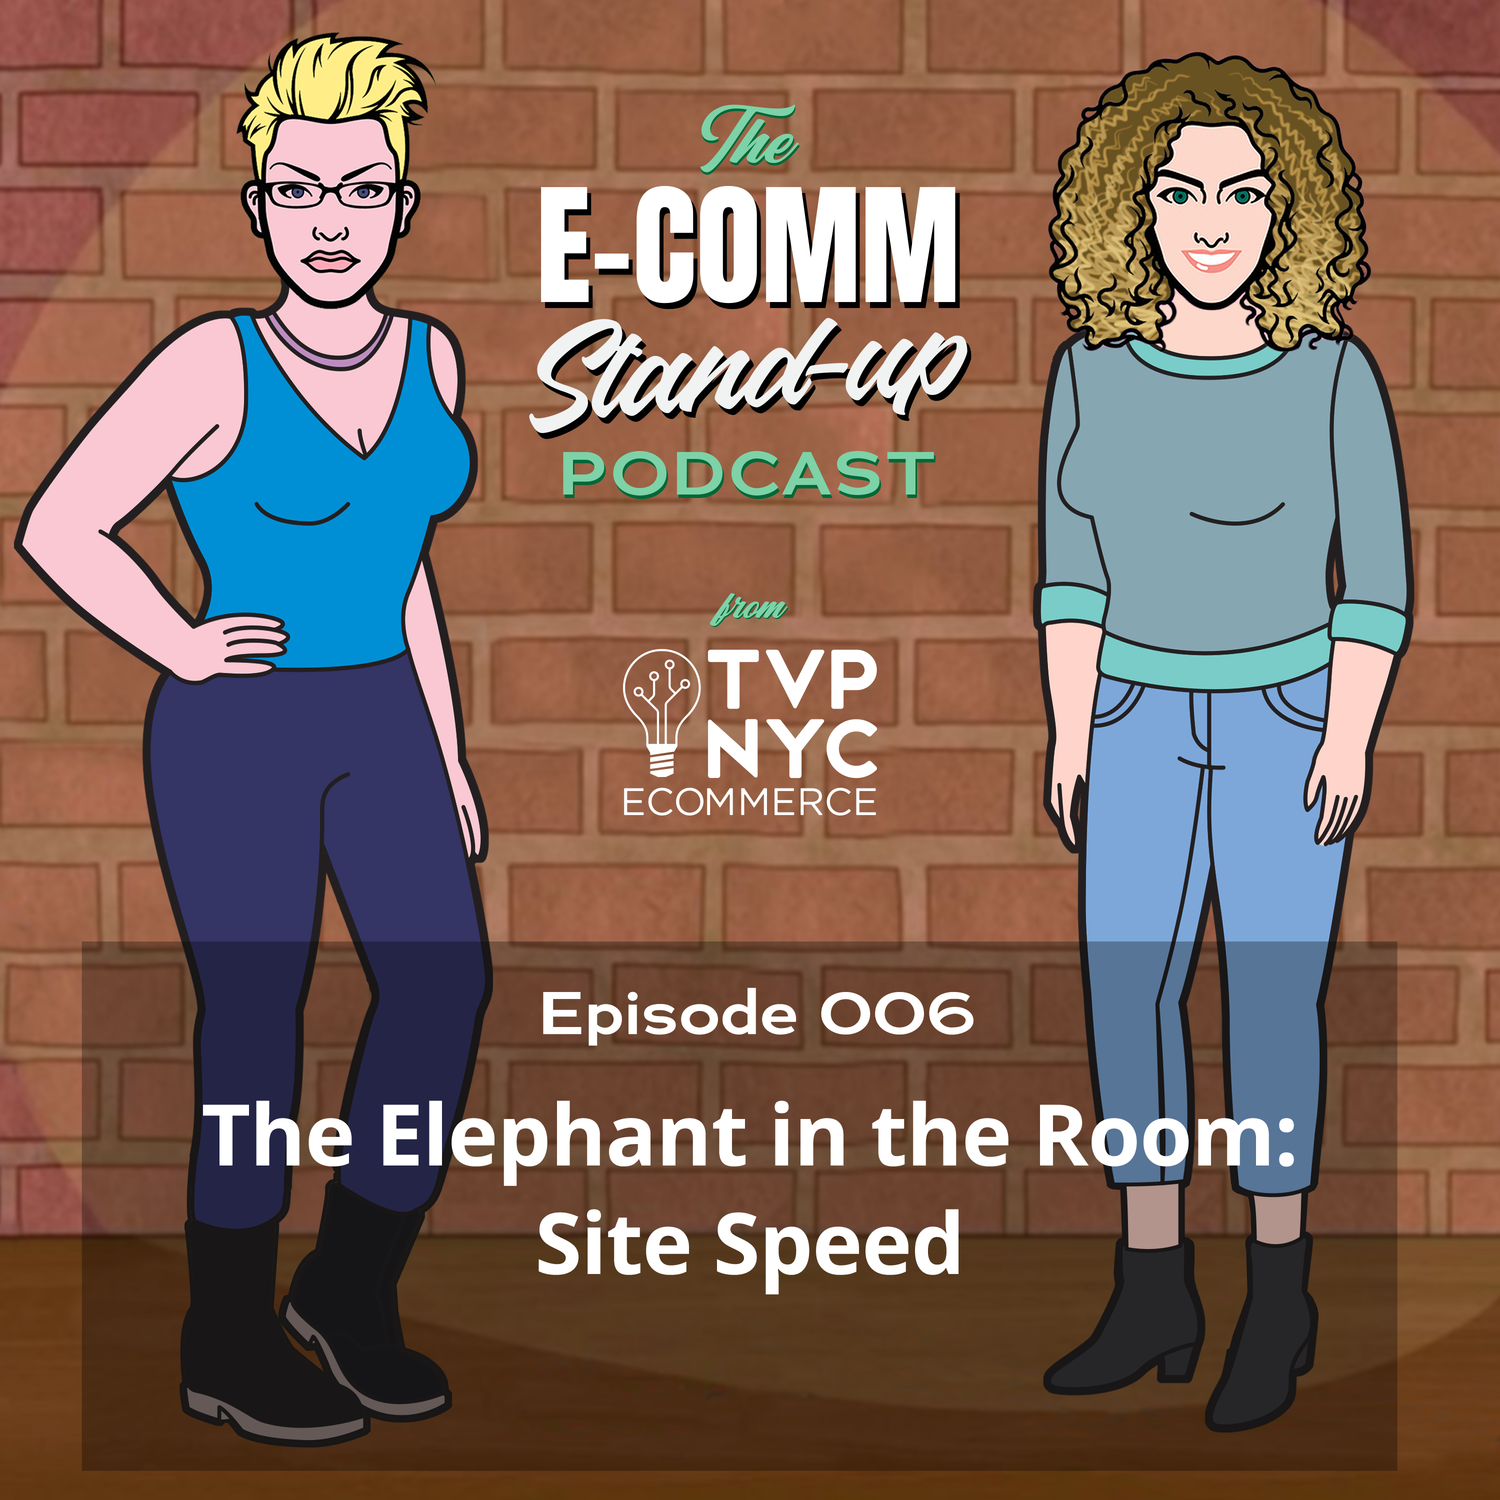 [Podcast] The Elephant in the Room: Site Speed